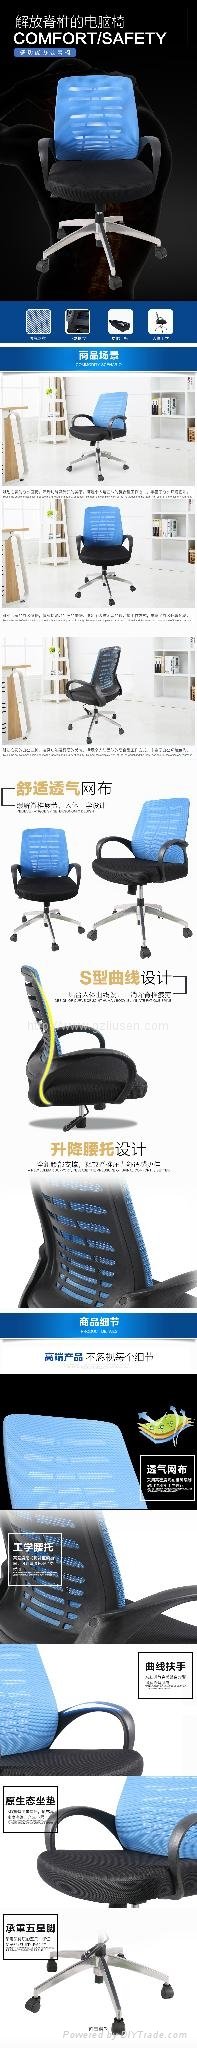 Simple and Economic Office Computer Chairs (BGY-201604002) 5